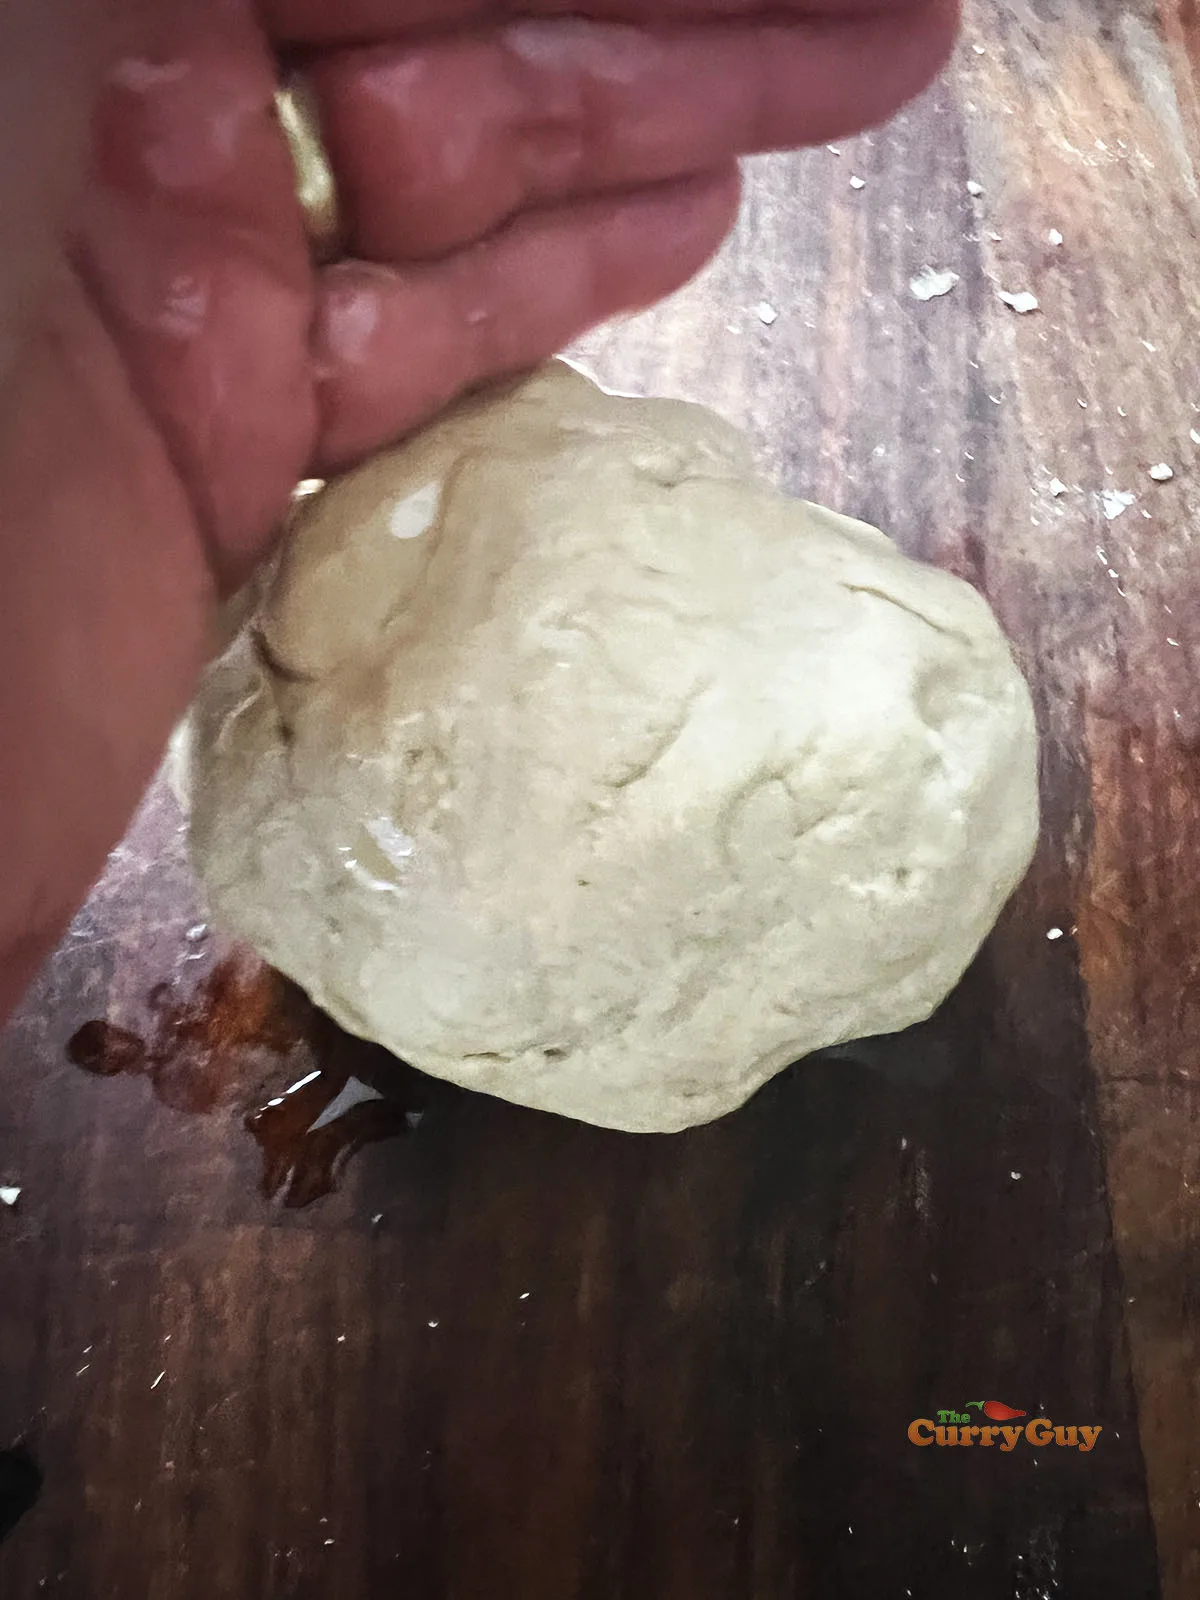 Adding oil and kneading the dough.